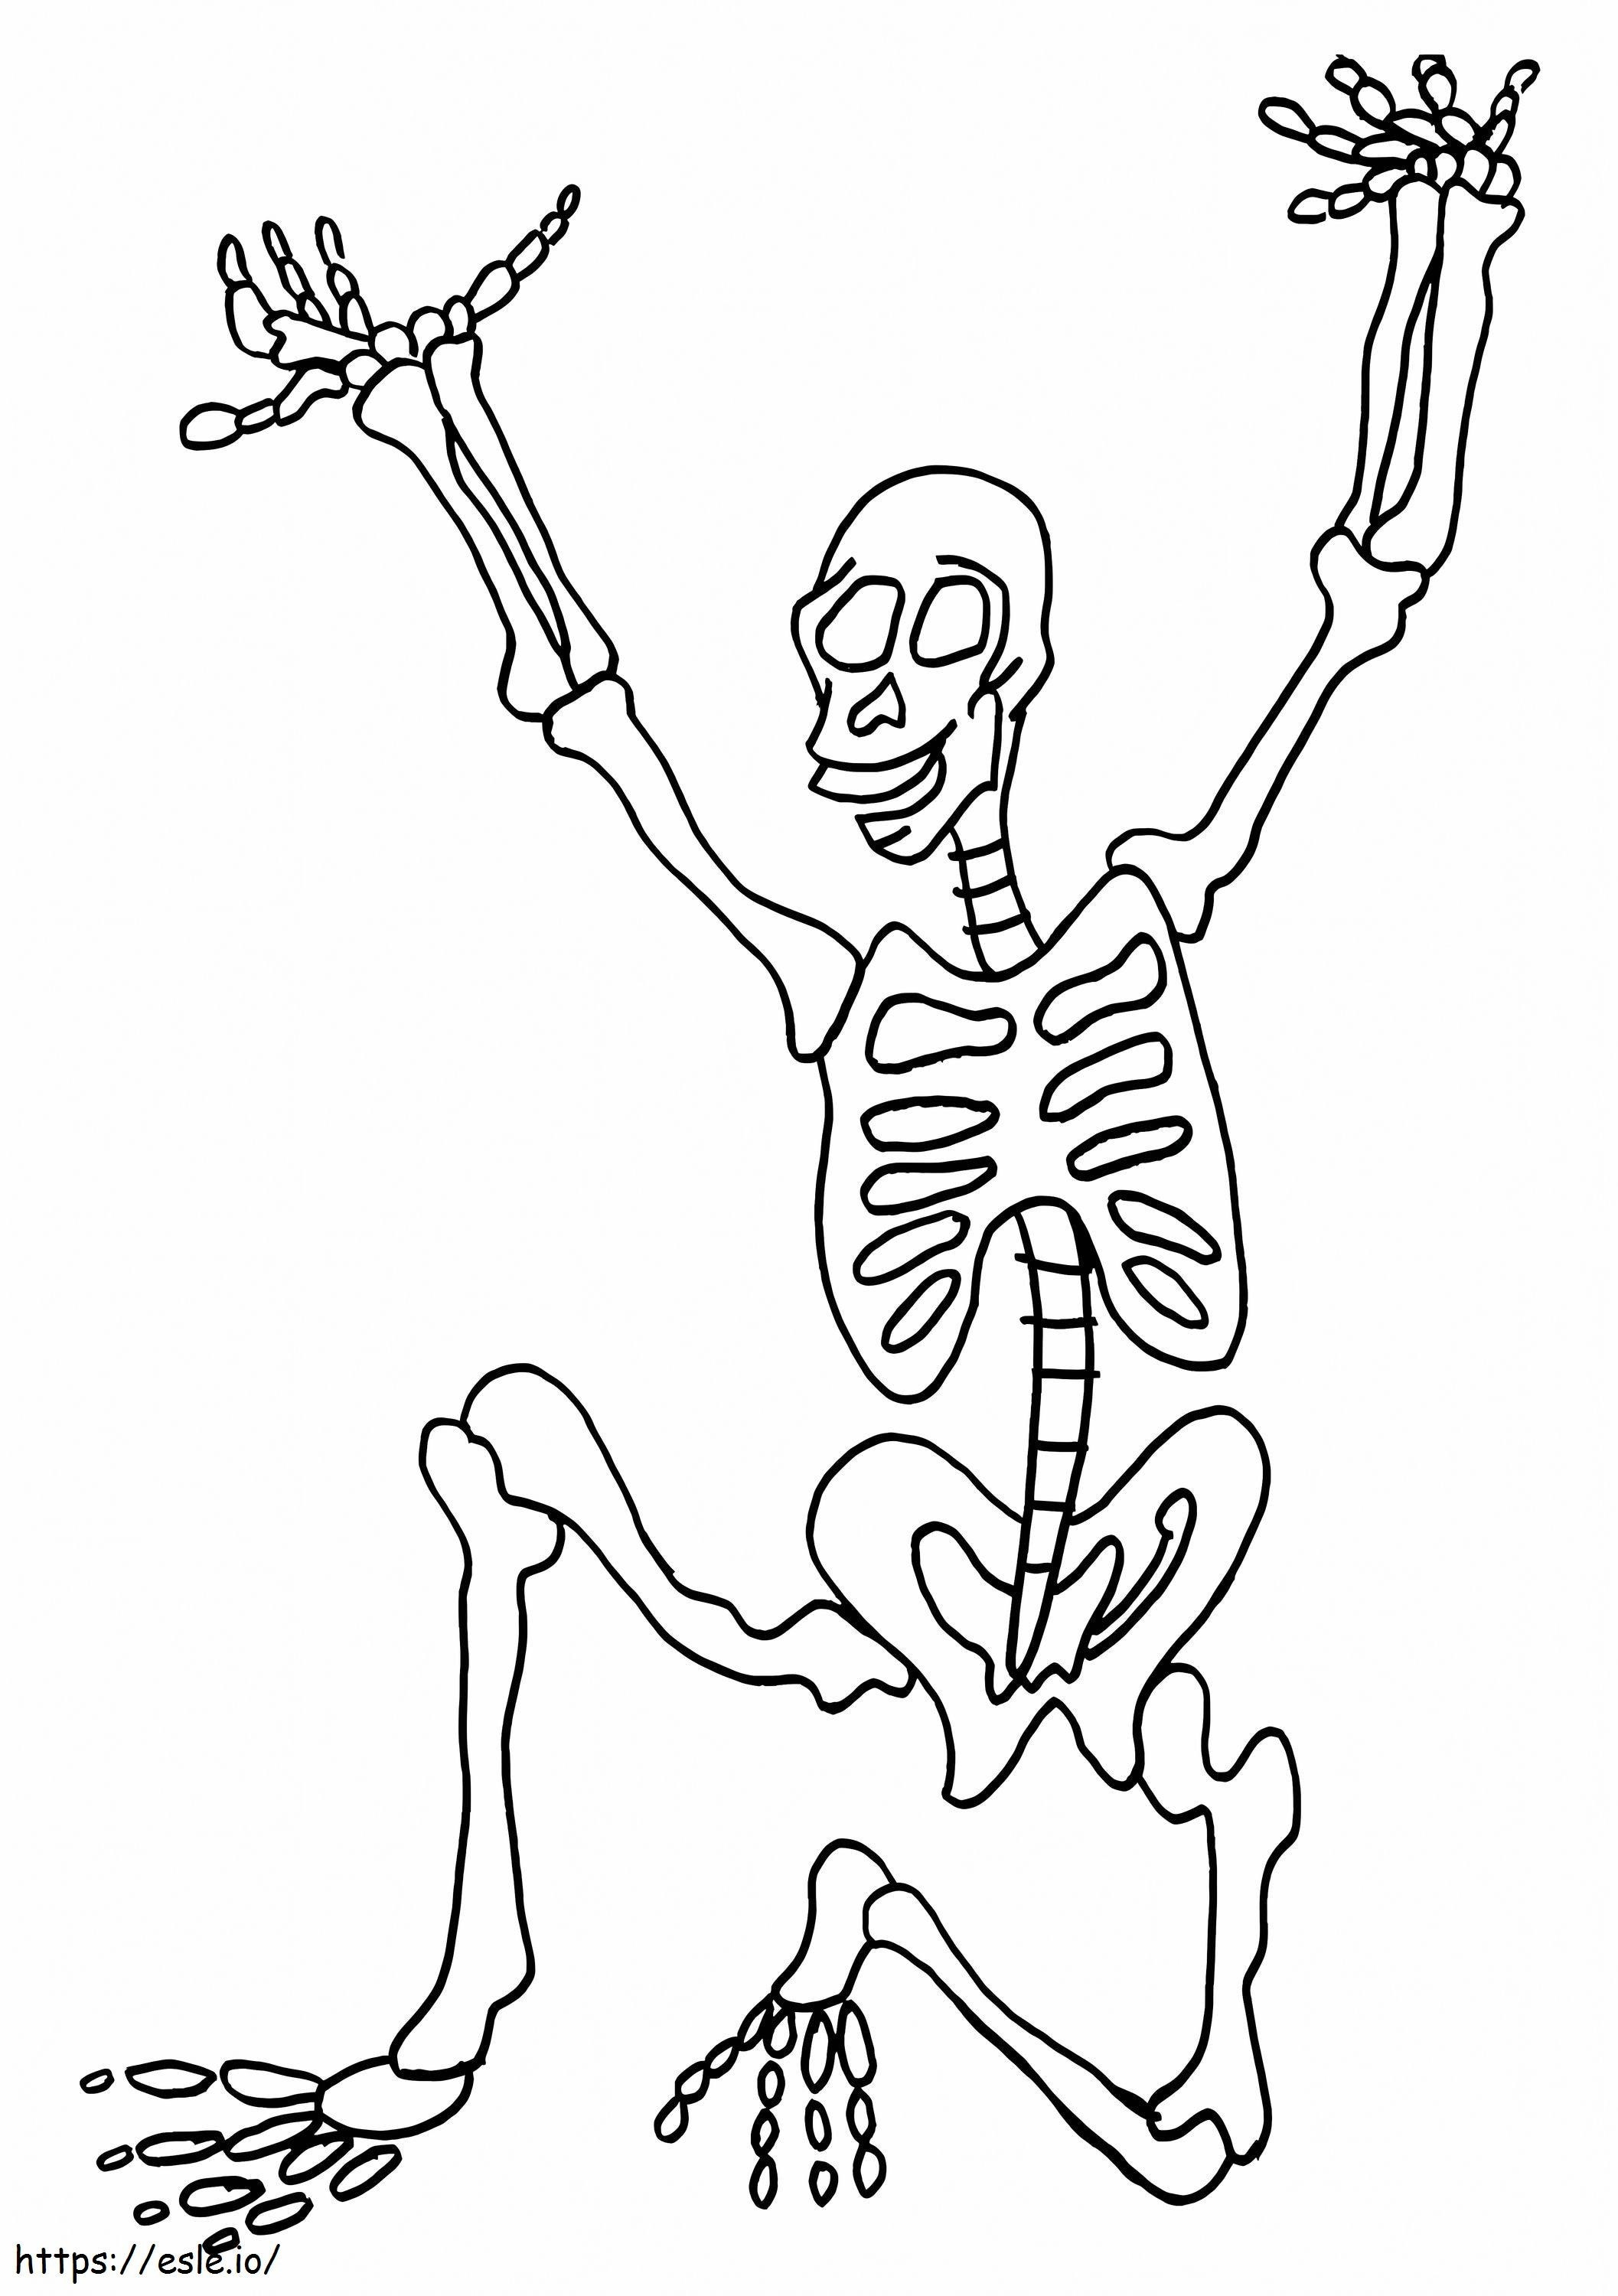 Cute Skeleton coloring page